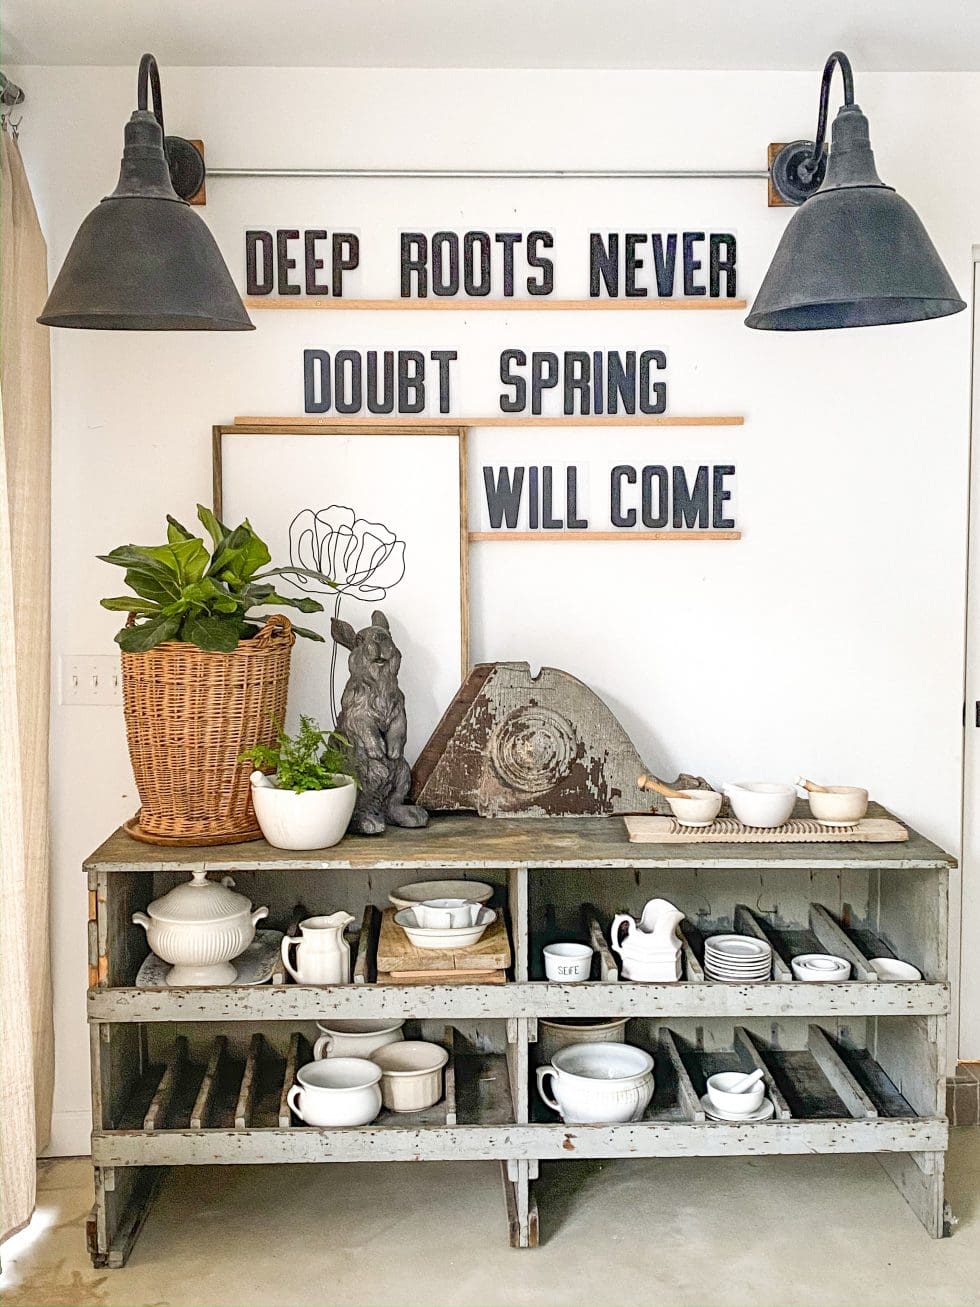 How to Shop for Beautiful Vintage Decor - Robyn's French Nest